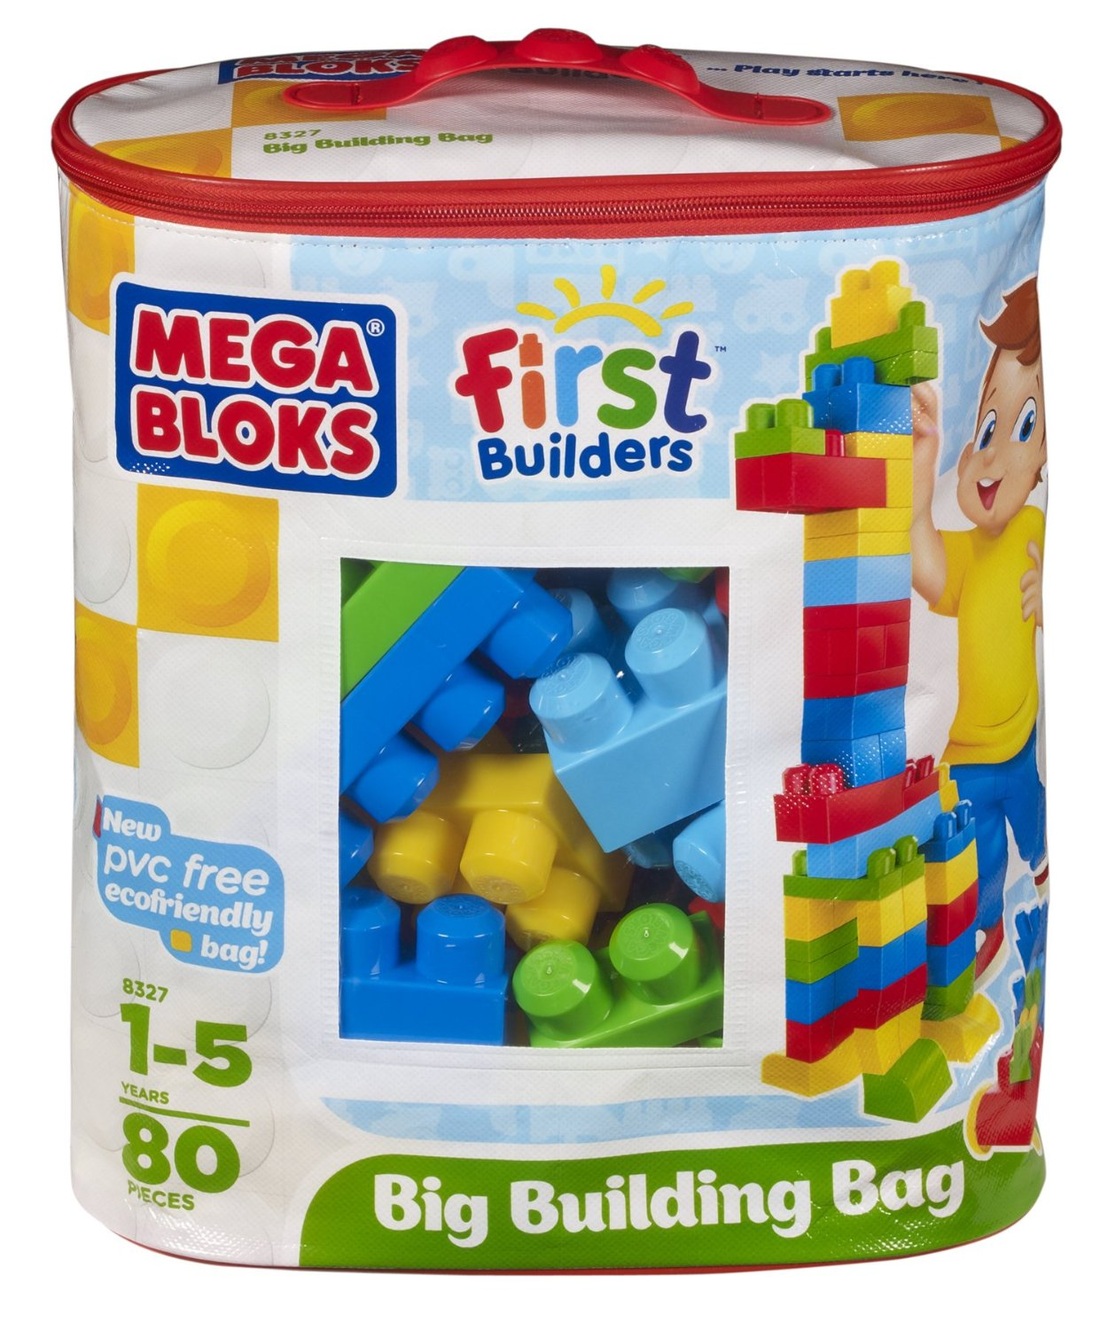 TOP TOYS FOR 2 YEAR OLDS